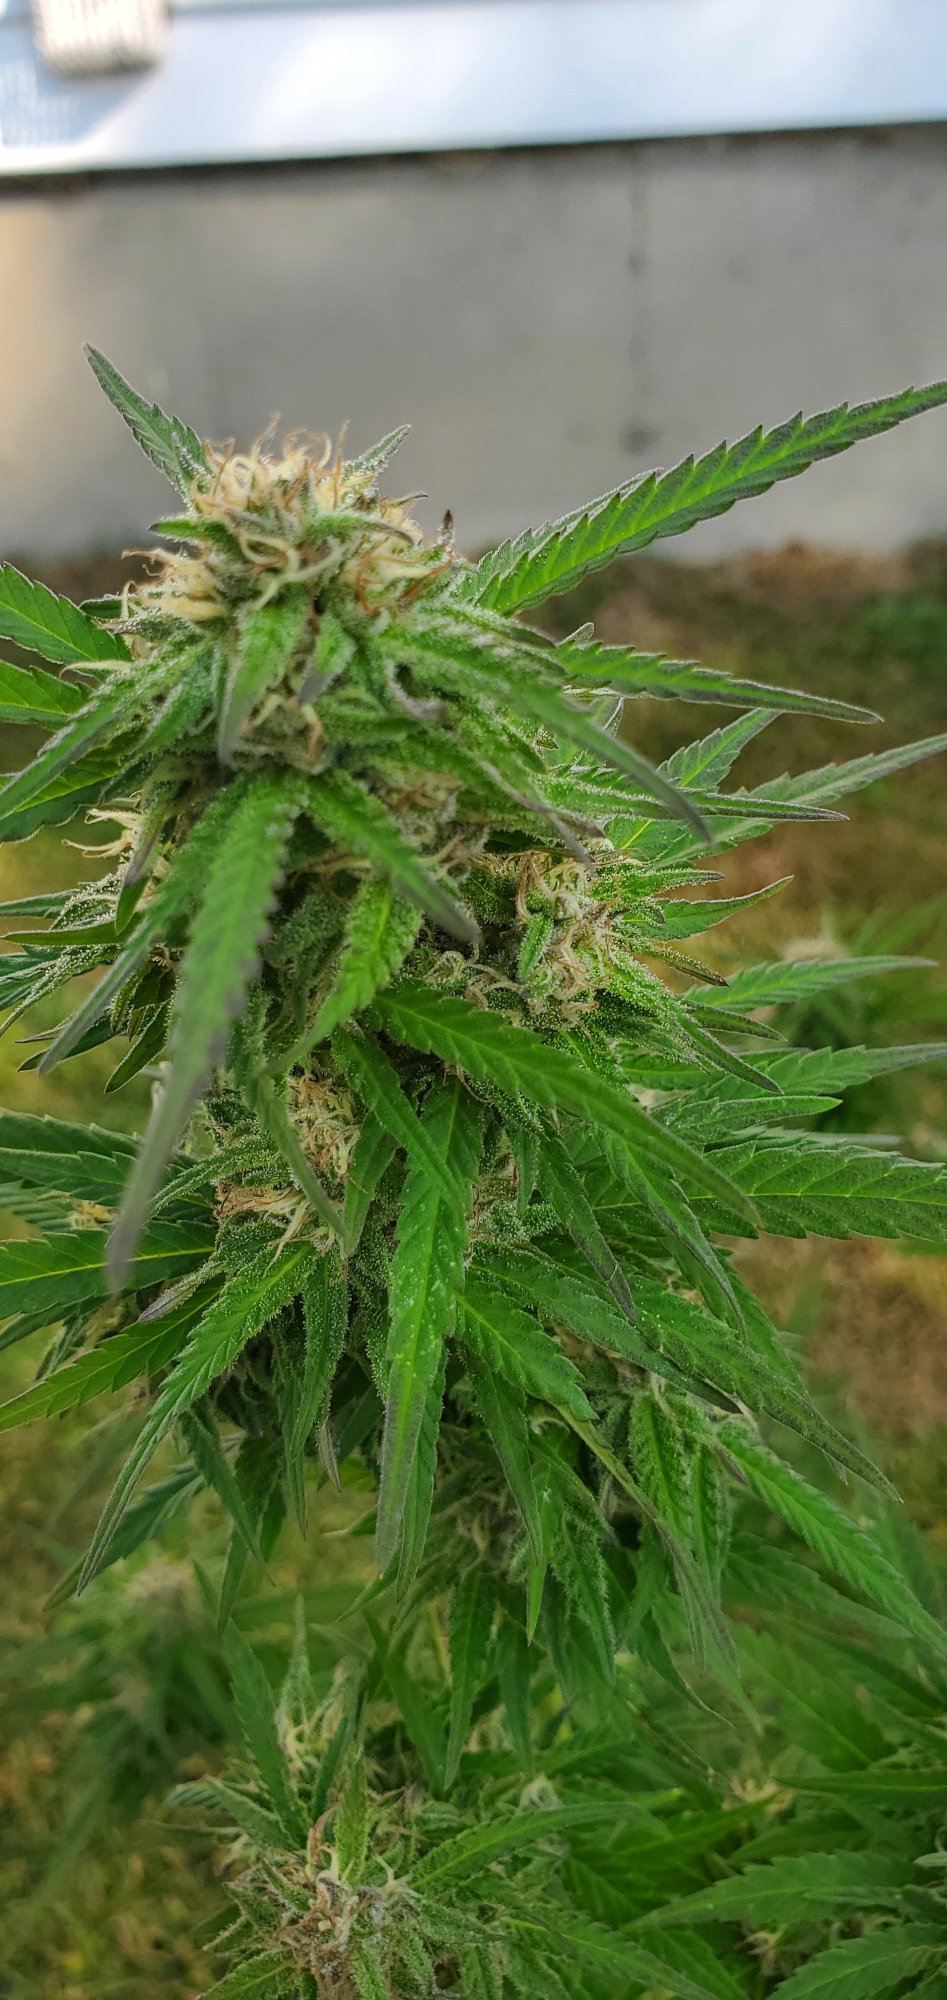 Not too much longer for these girls